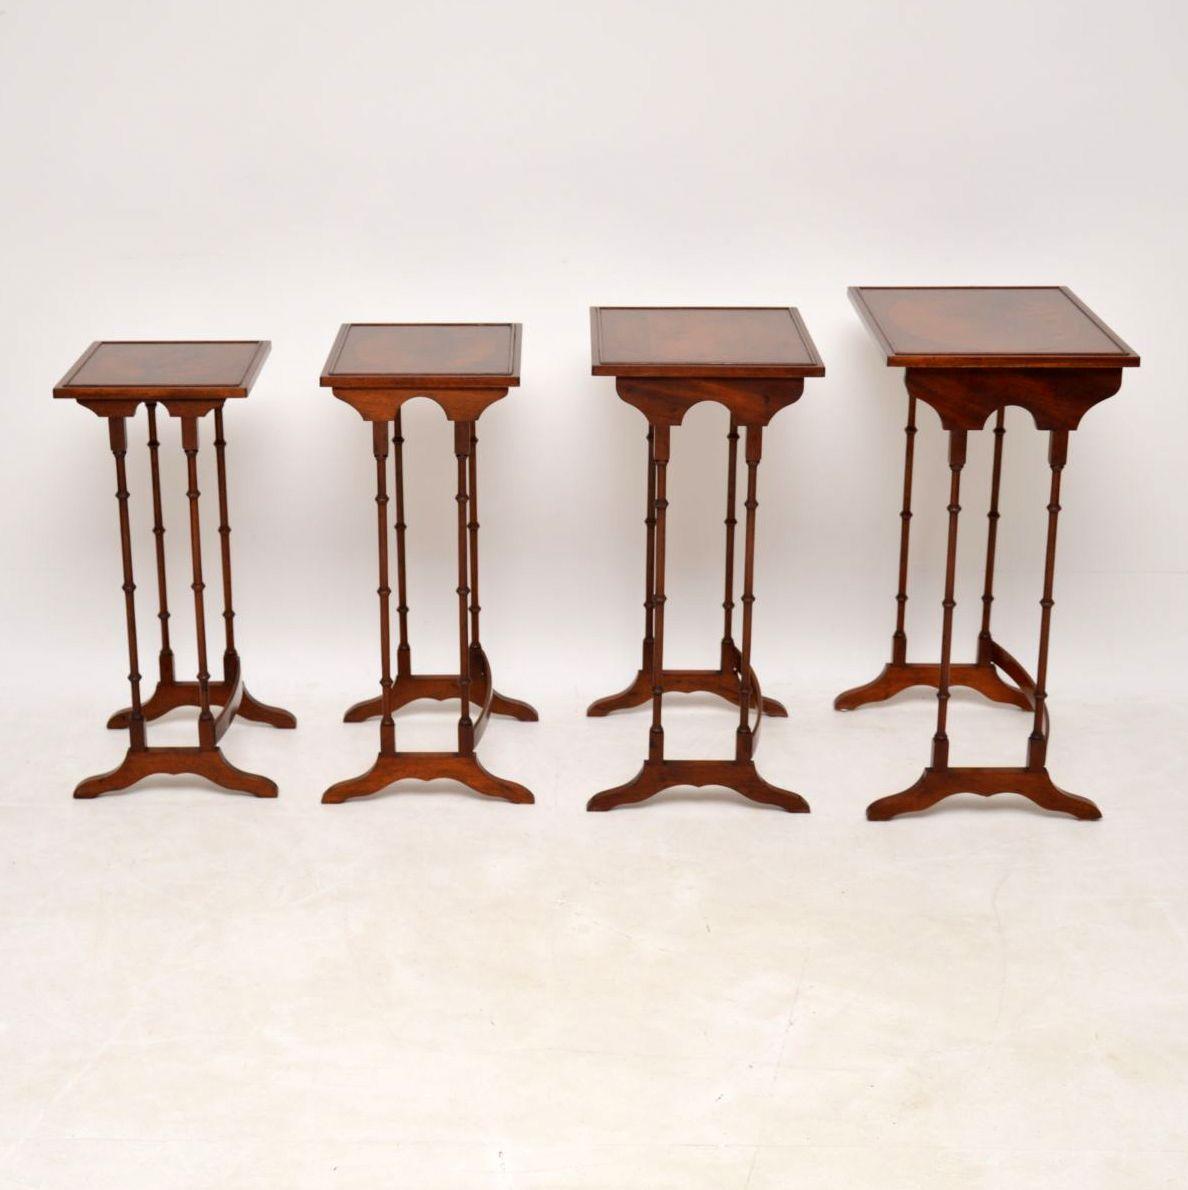 Early 20th Century Antique Regency Style Mahogany Nest of Four Tables